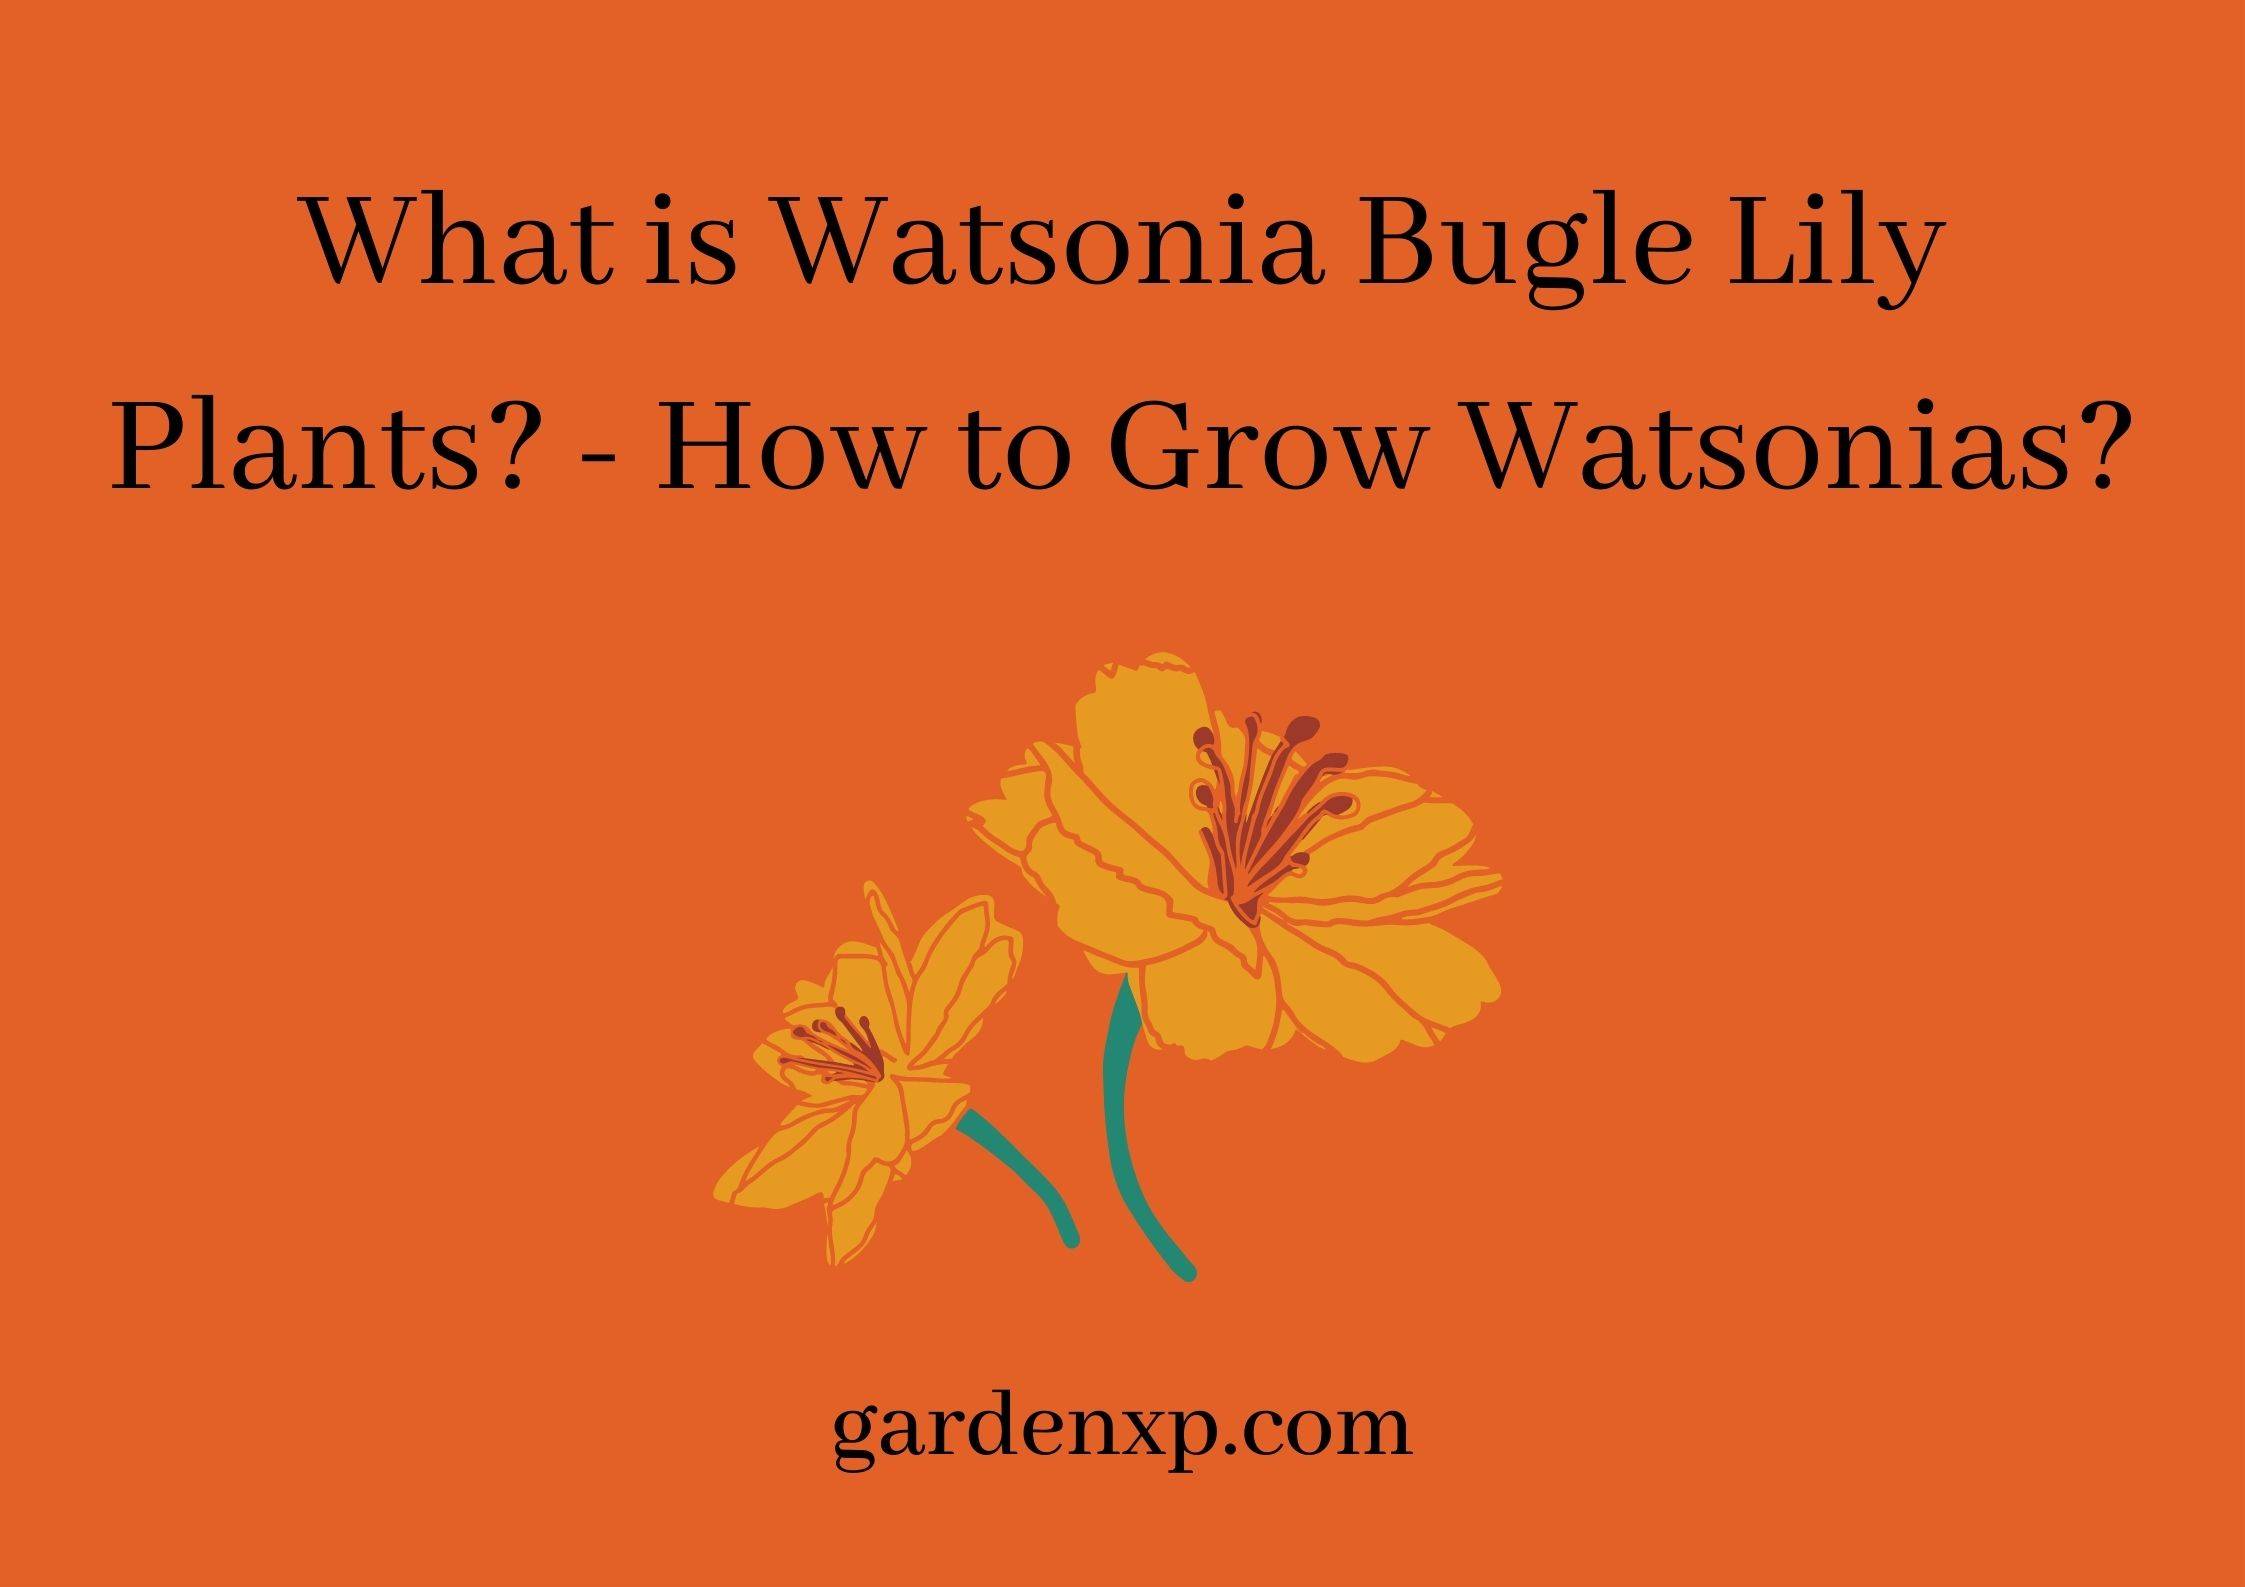 What is Watsonia Bugle Lily Plants? - How to Grow Watsonias?